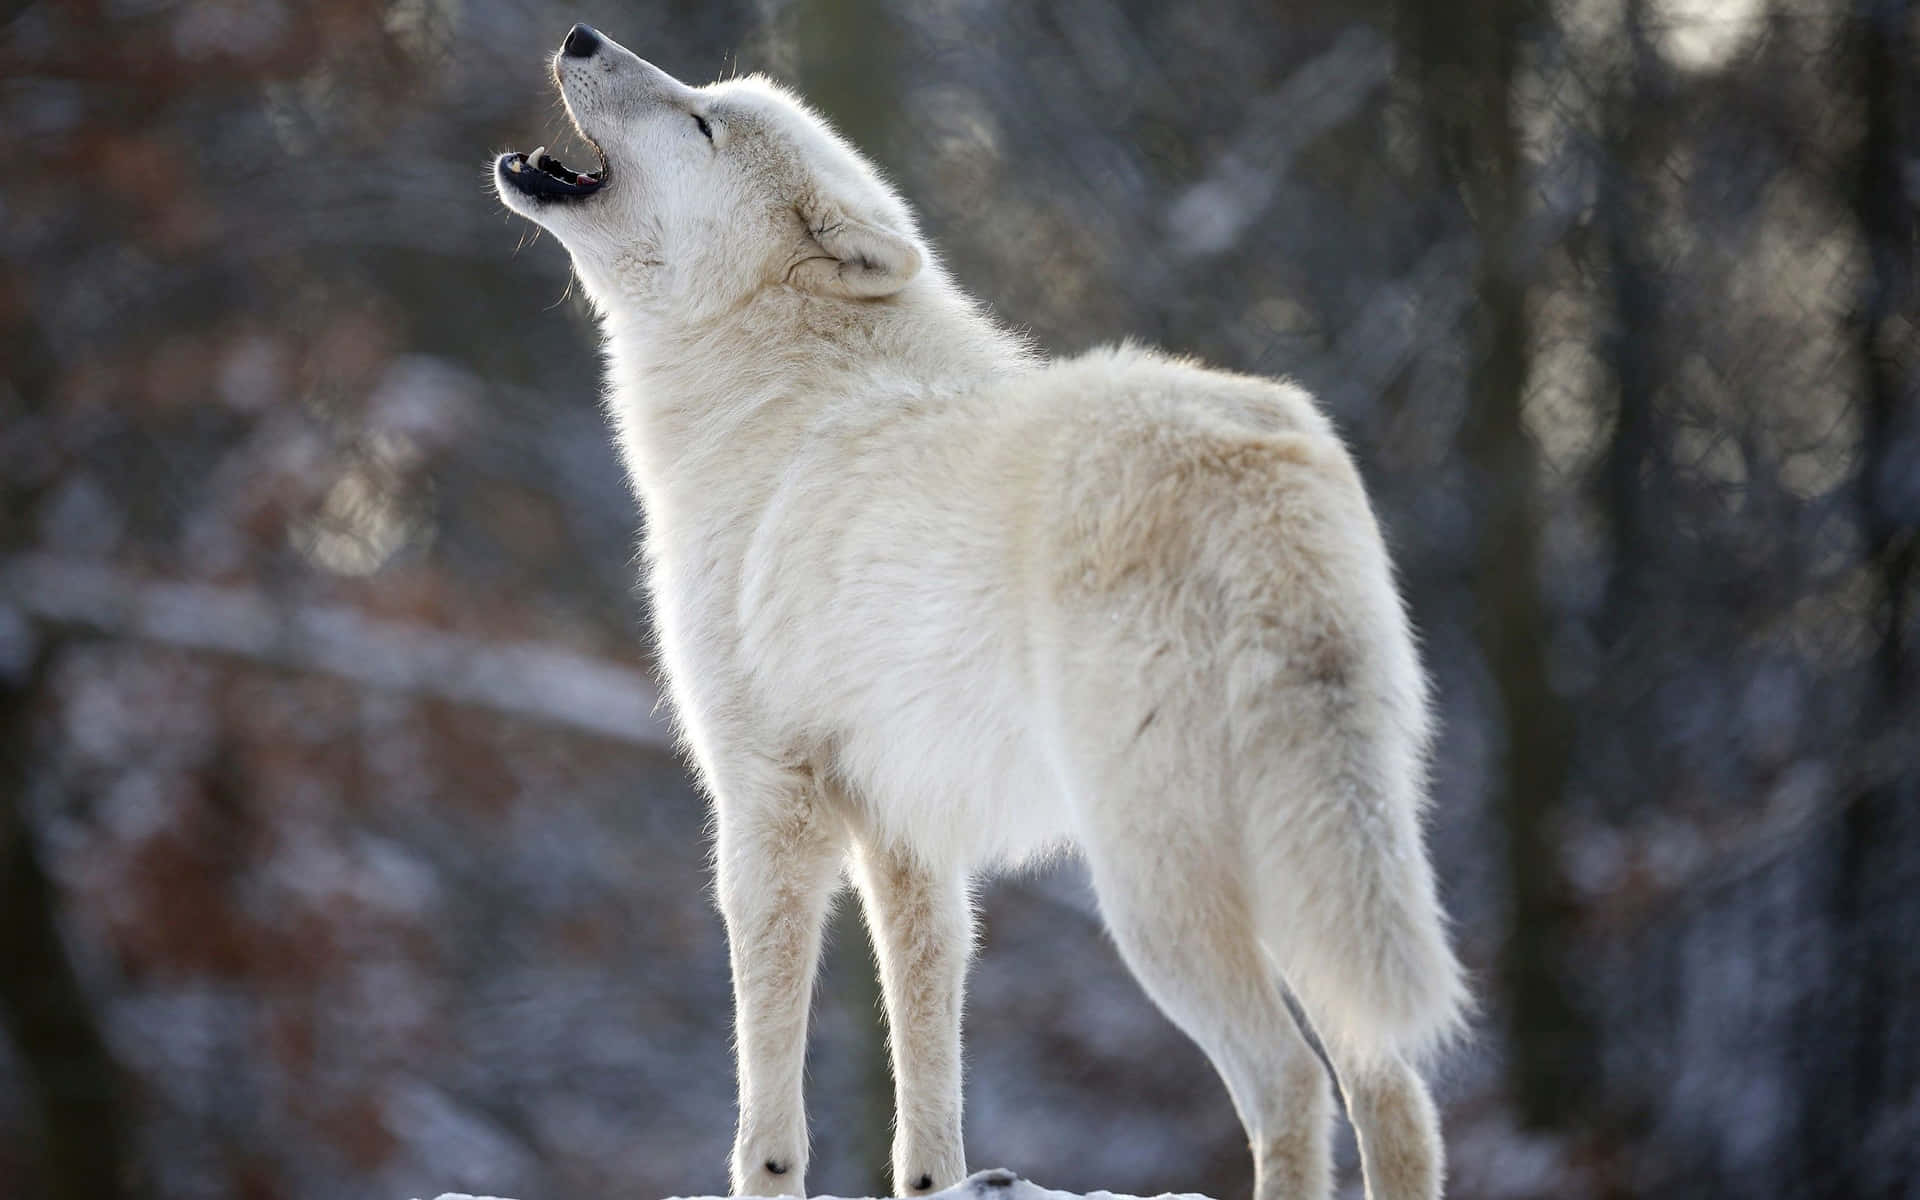 A Majestic Howling Wolf Pictured in the Wild